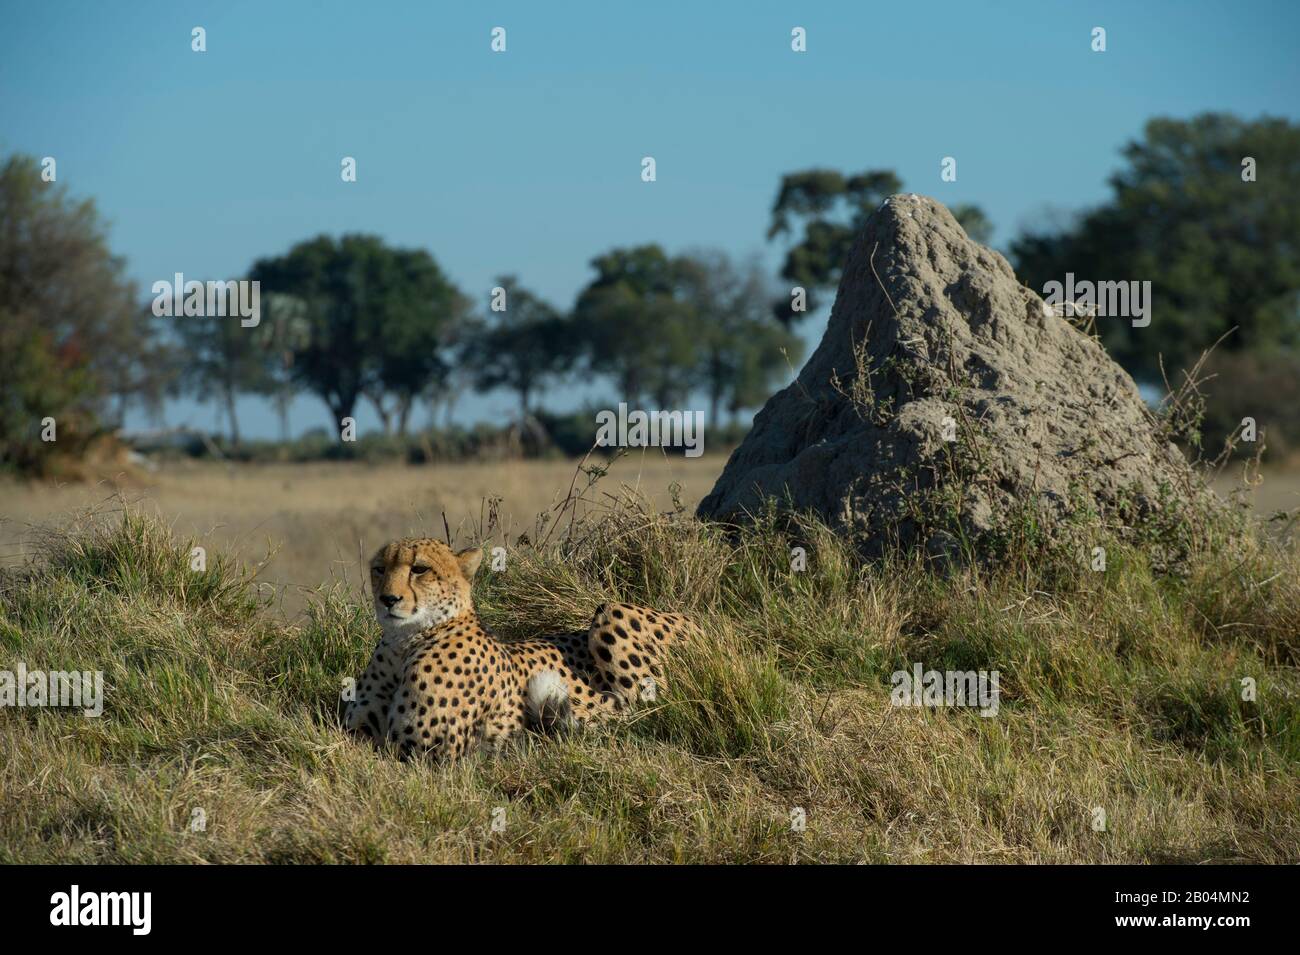 A Cheetah (Acinonyx jubatus) in front of termite hill in the Chitabe area of the Okavango Delta in the northern part of Botswana. Stock Photo